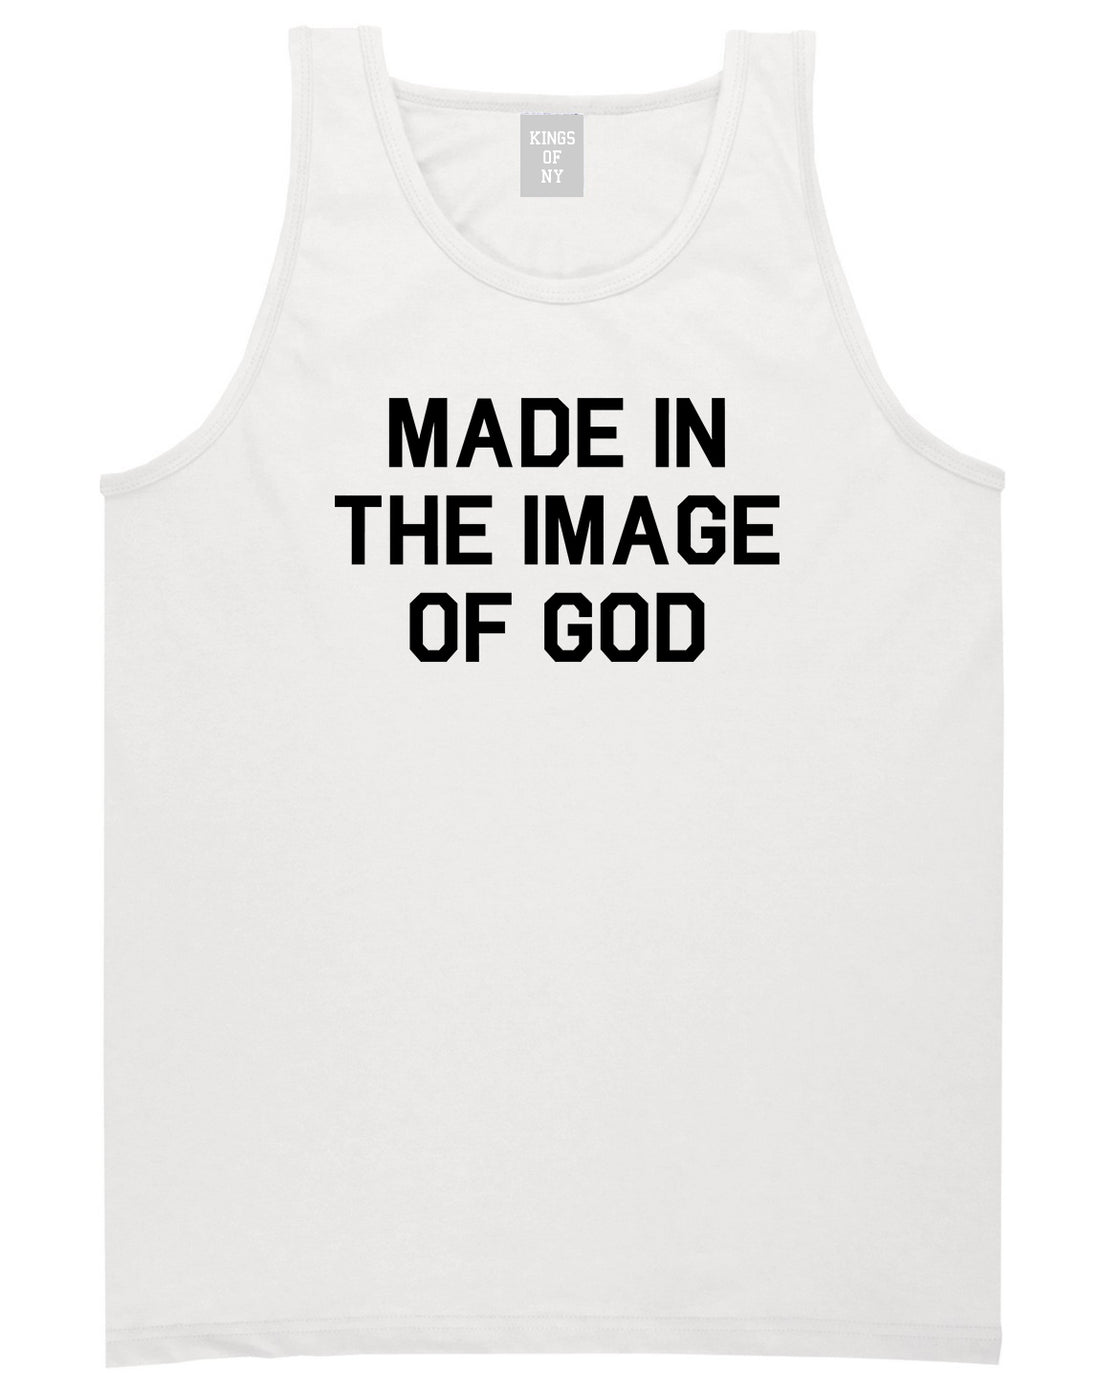 Made In The Image Of God Mens Tank Top Shirt White by Kings Of NY